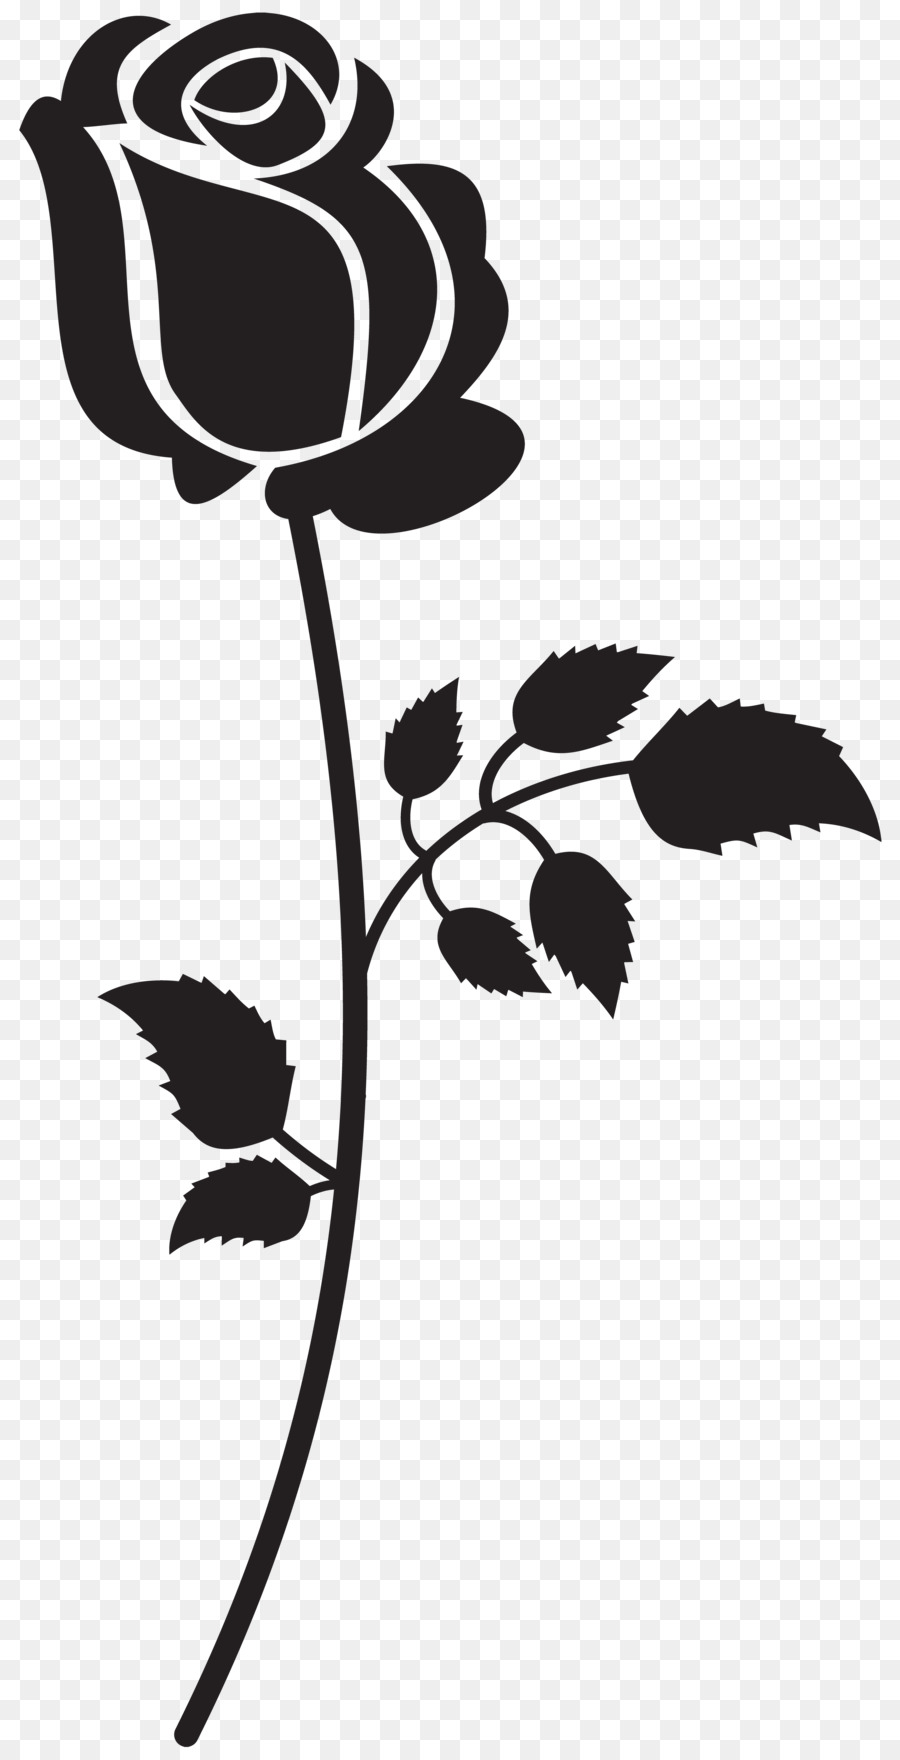 Free Flower Clipart Silhouette, Download Free Flower Clipart Silhouette ...